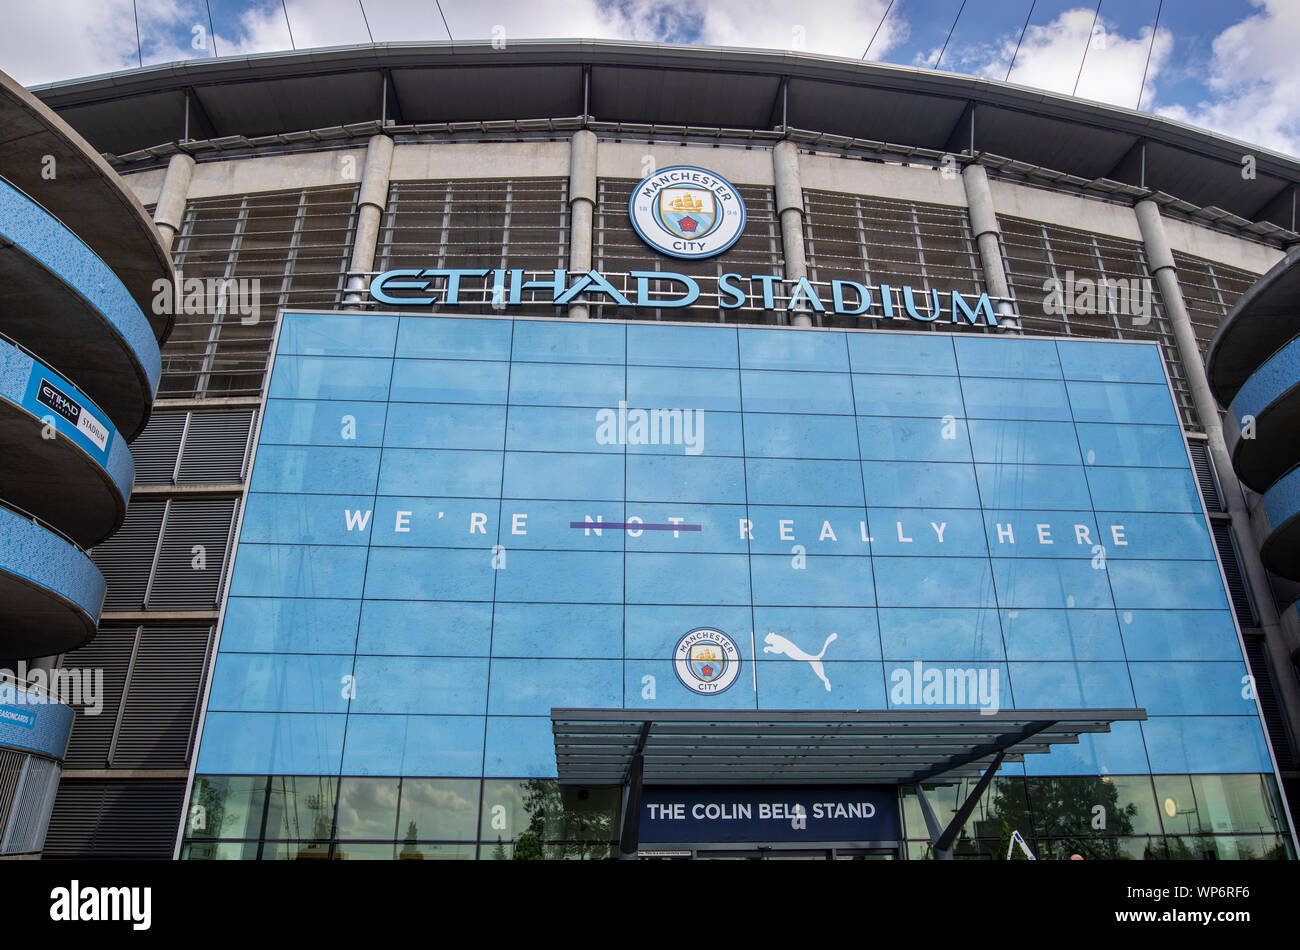 The Etihad Stadium, home of the Premier League's Manchester City football club in England, UK Stock Photo